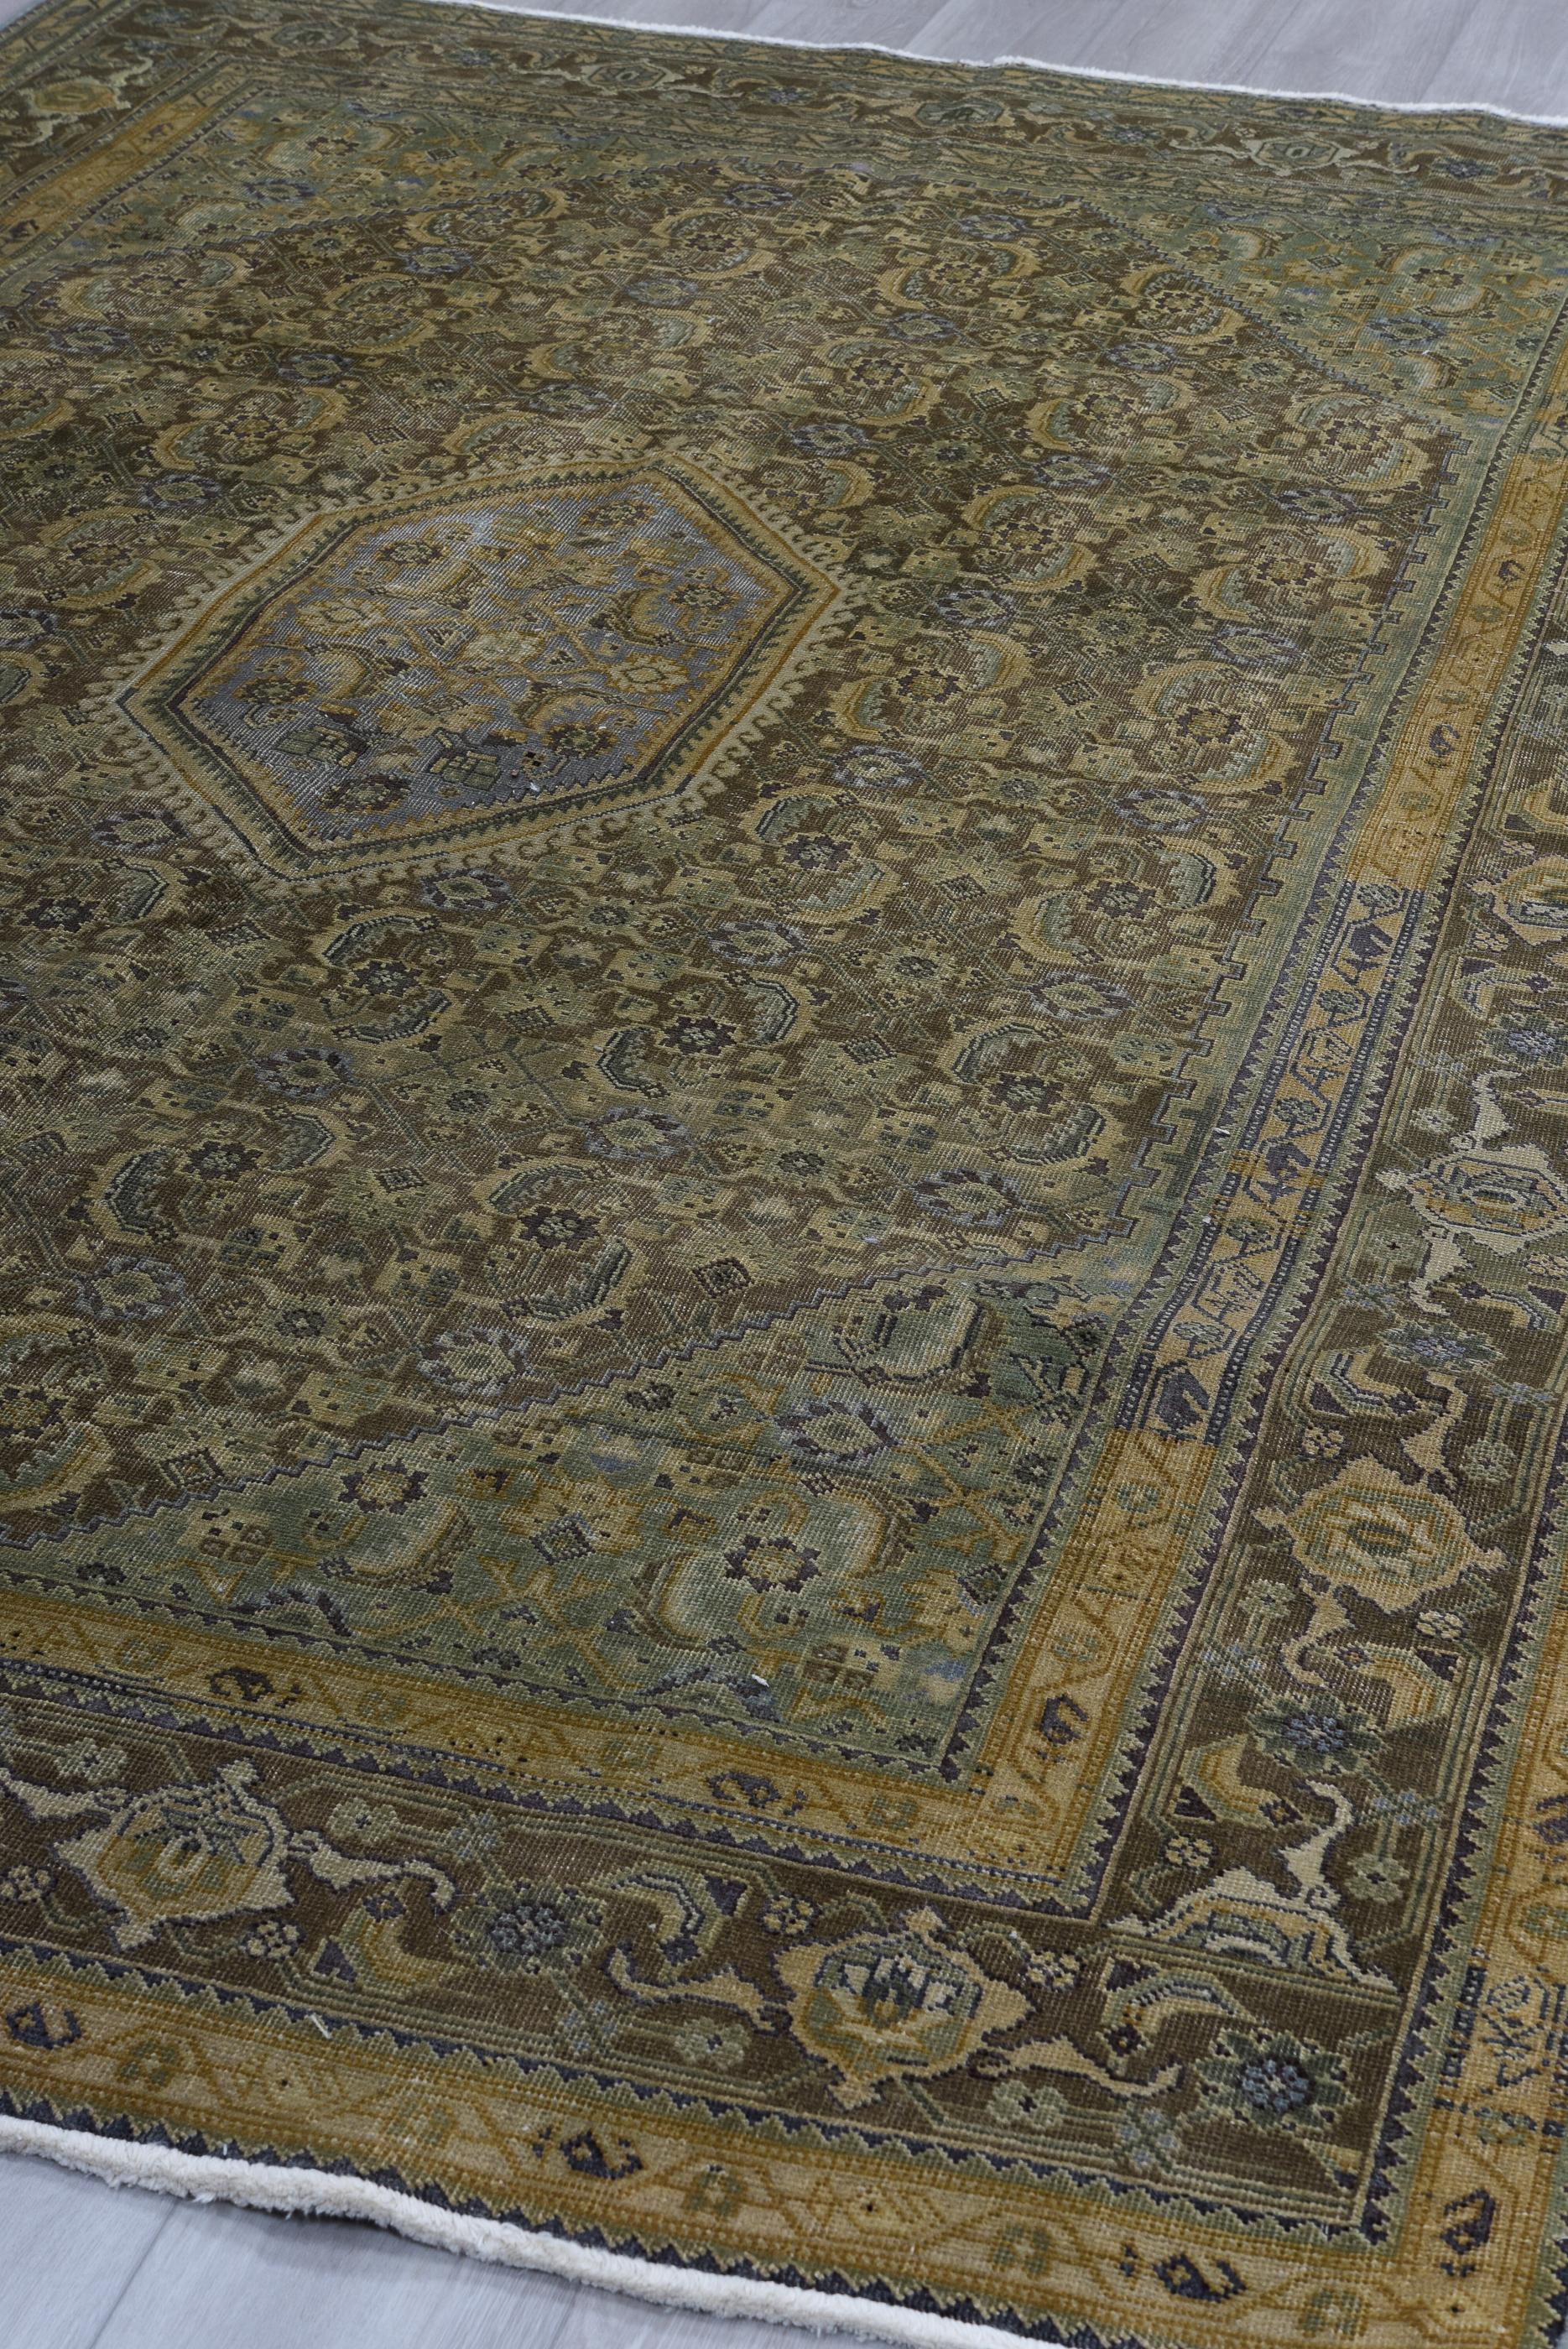 Wool Antique Tabriz `Earth Green Tones and Tan Shades - Grand Central Medallion For Sale